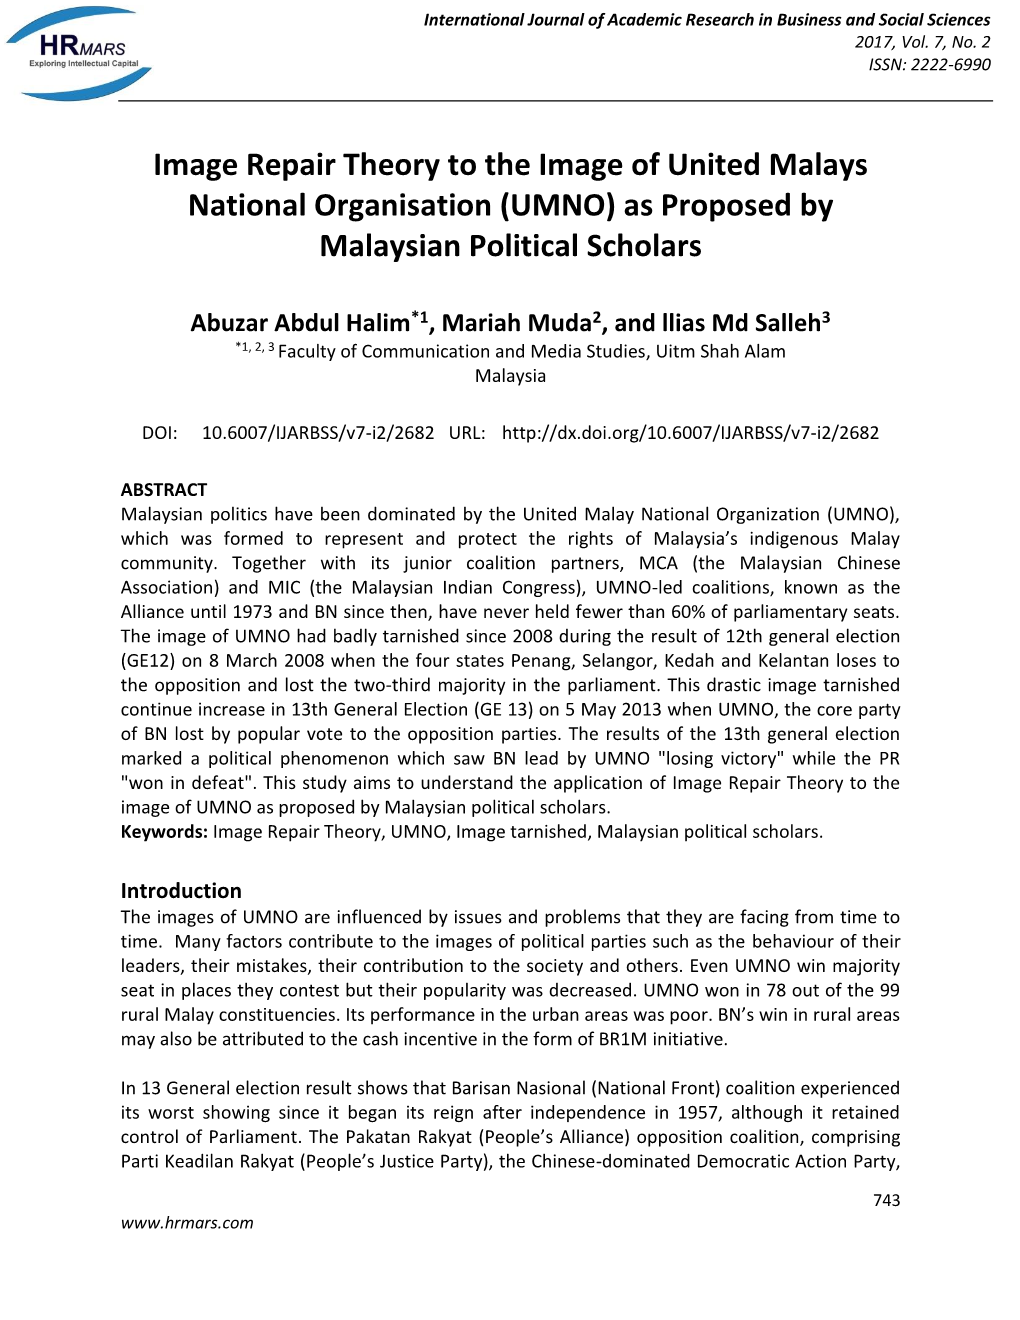 Image Repair Theory to the Image of United Malays National Organisation (UMNO) As Proposed by Malaysian Political Scholars